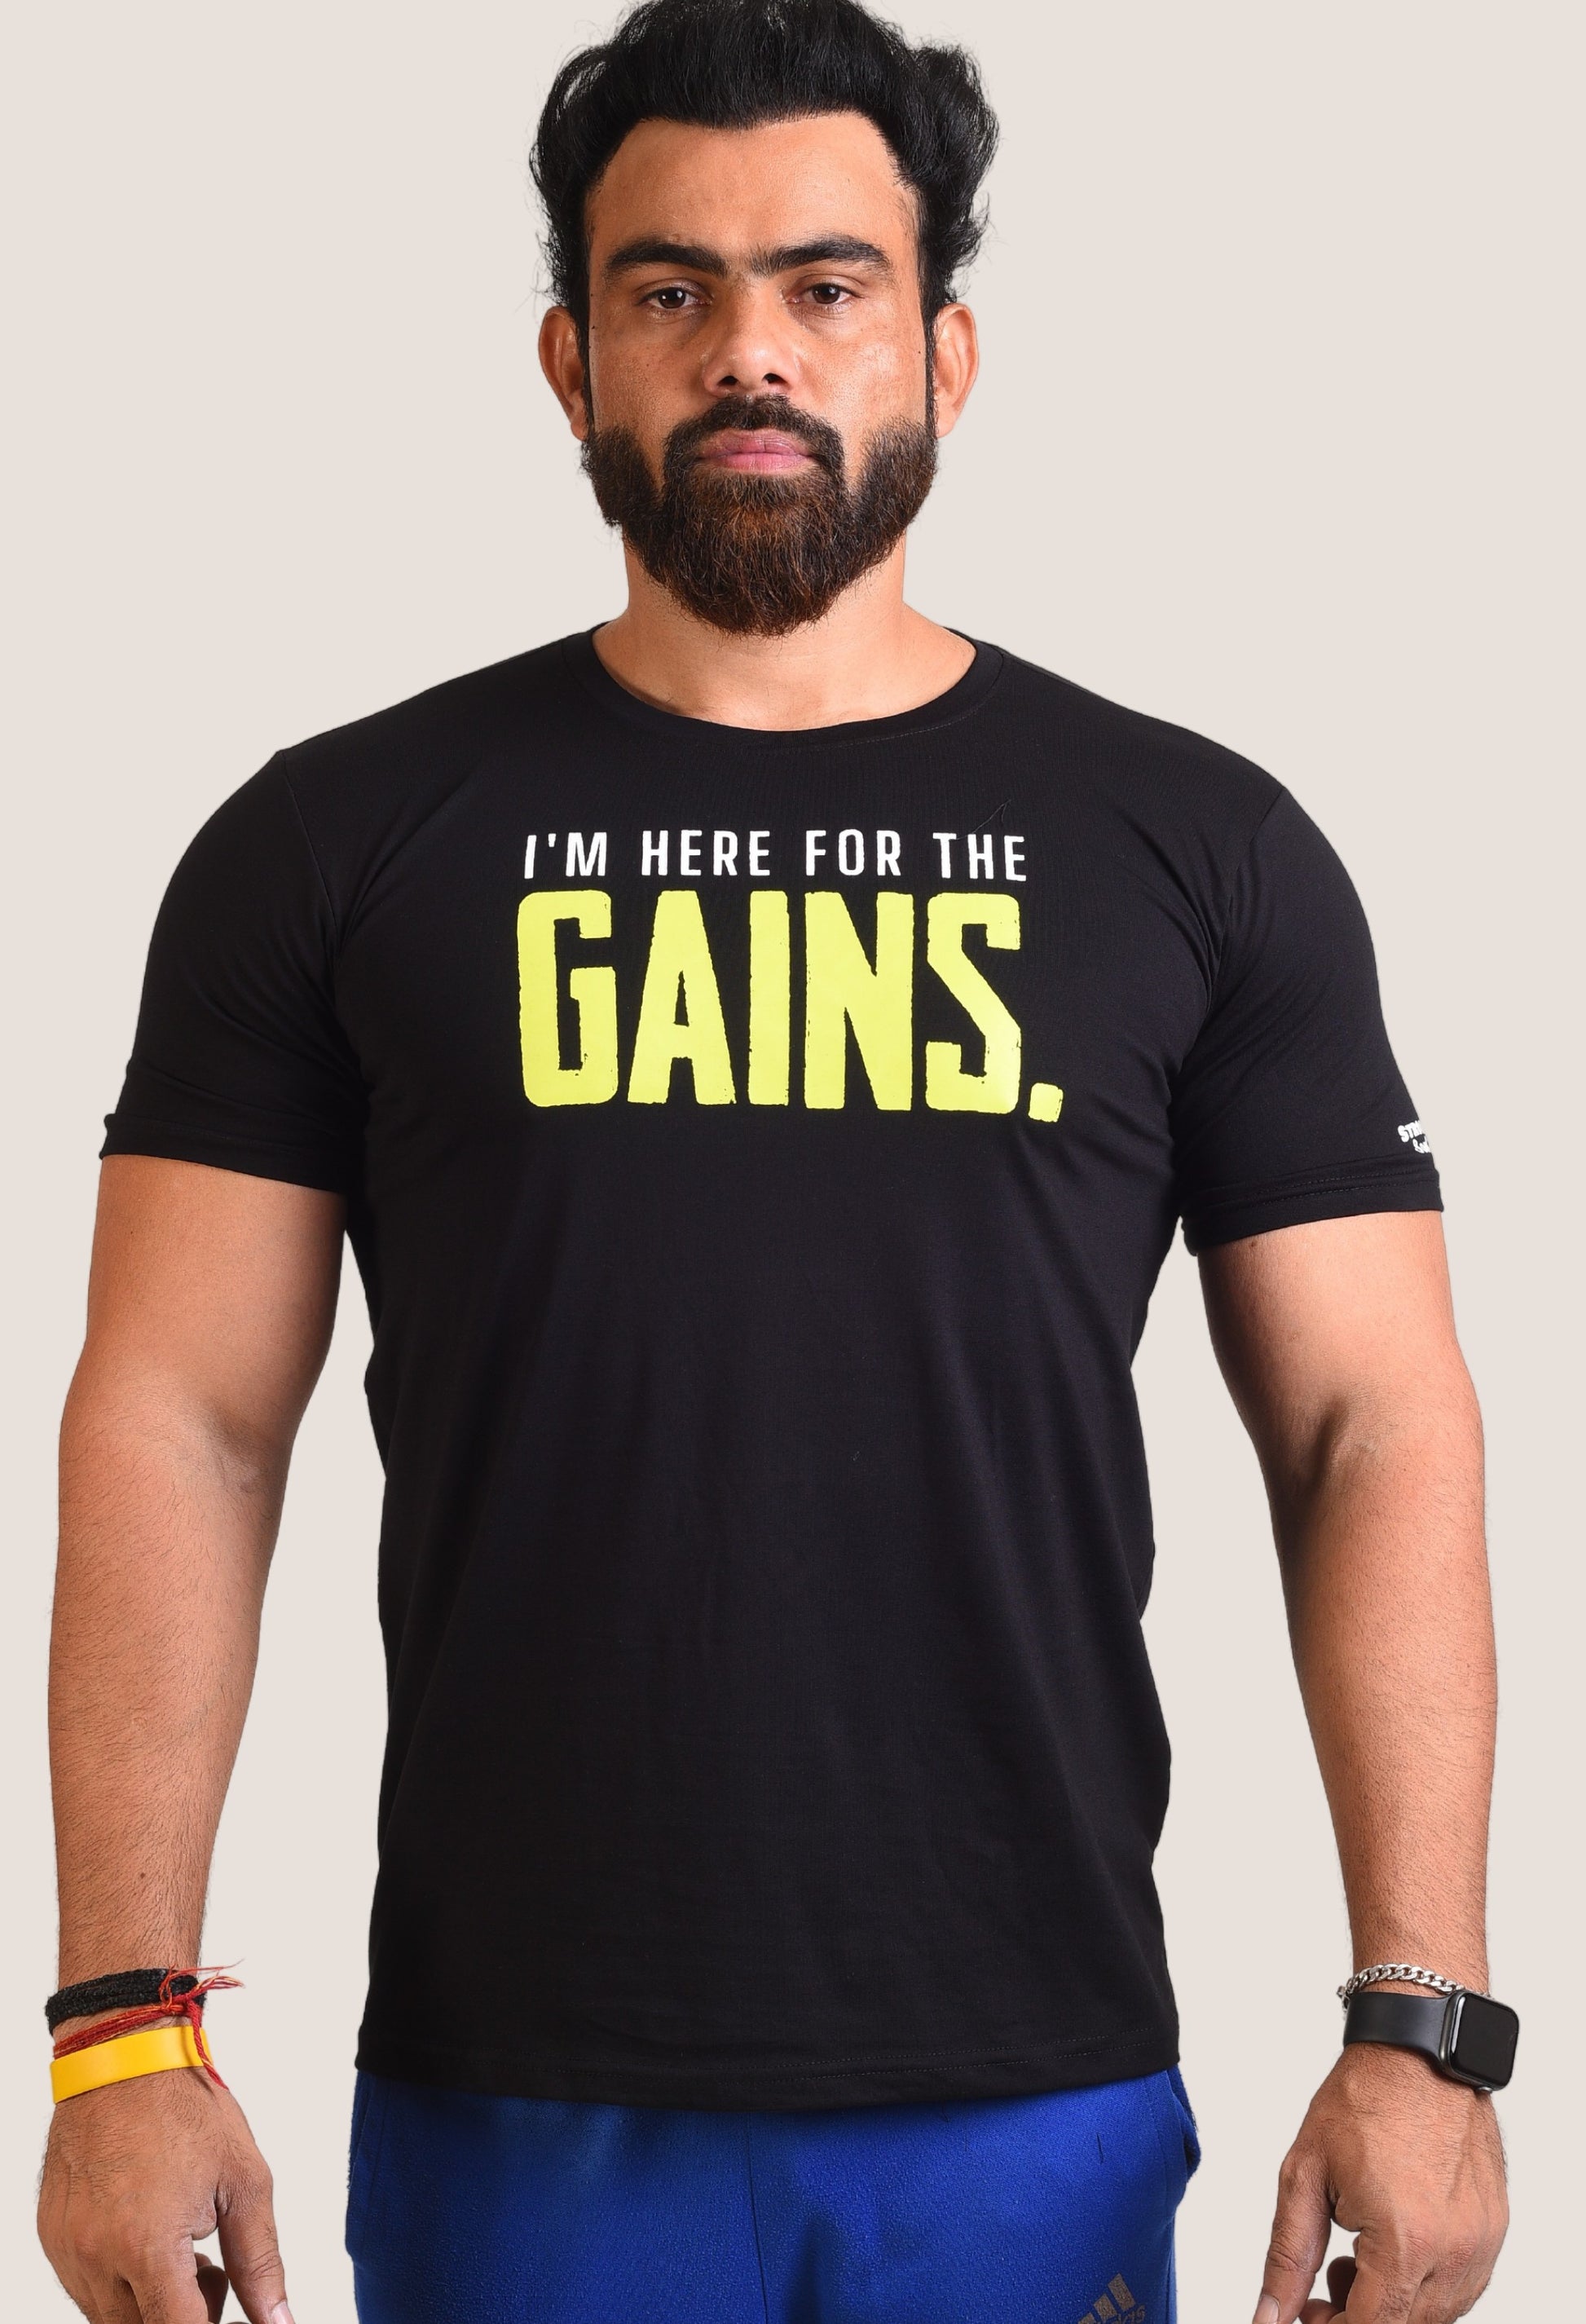 Gym T Shirt - I Am Here For The Gains - Men T-Shirt with premium cotton Lycra. The Sports T Shirt by Strong Soul